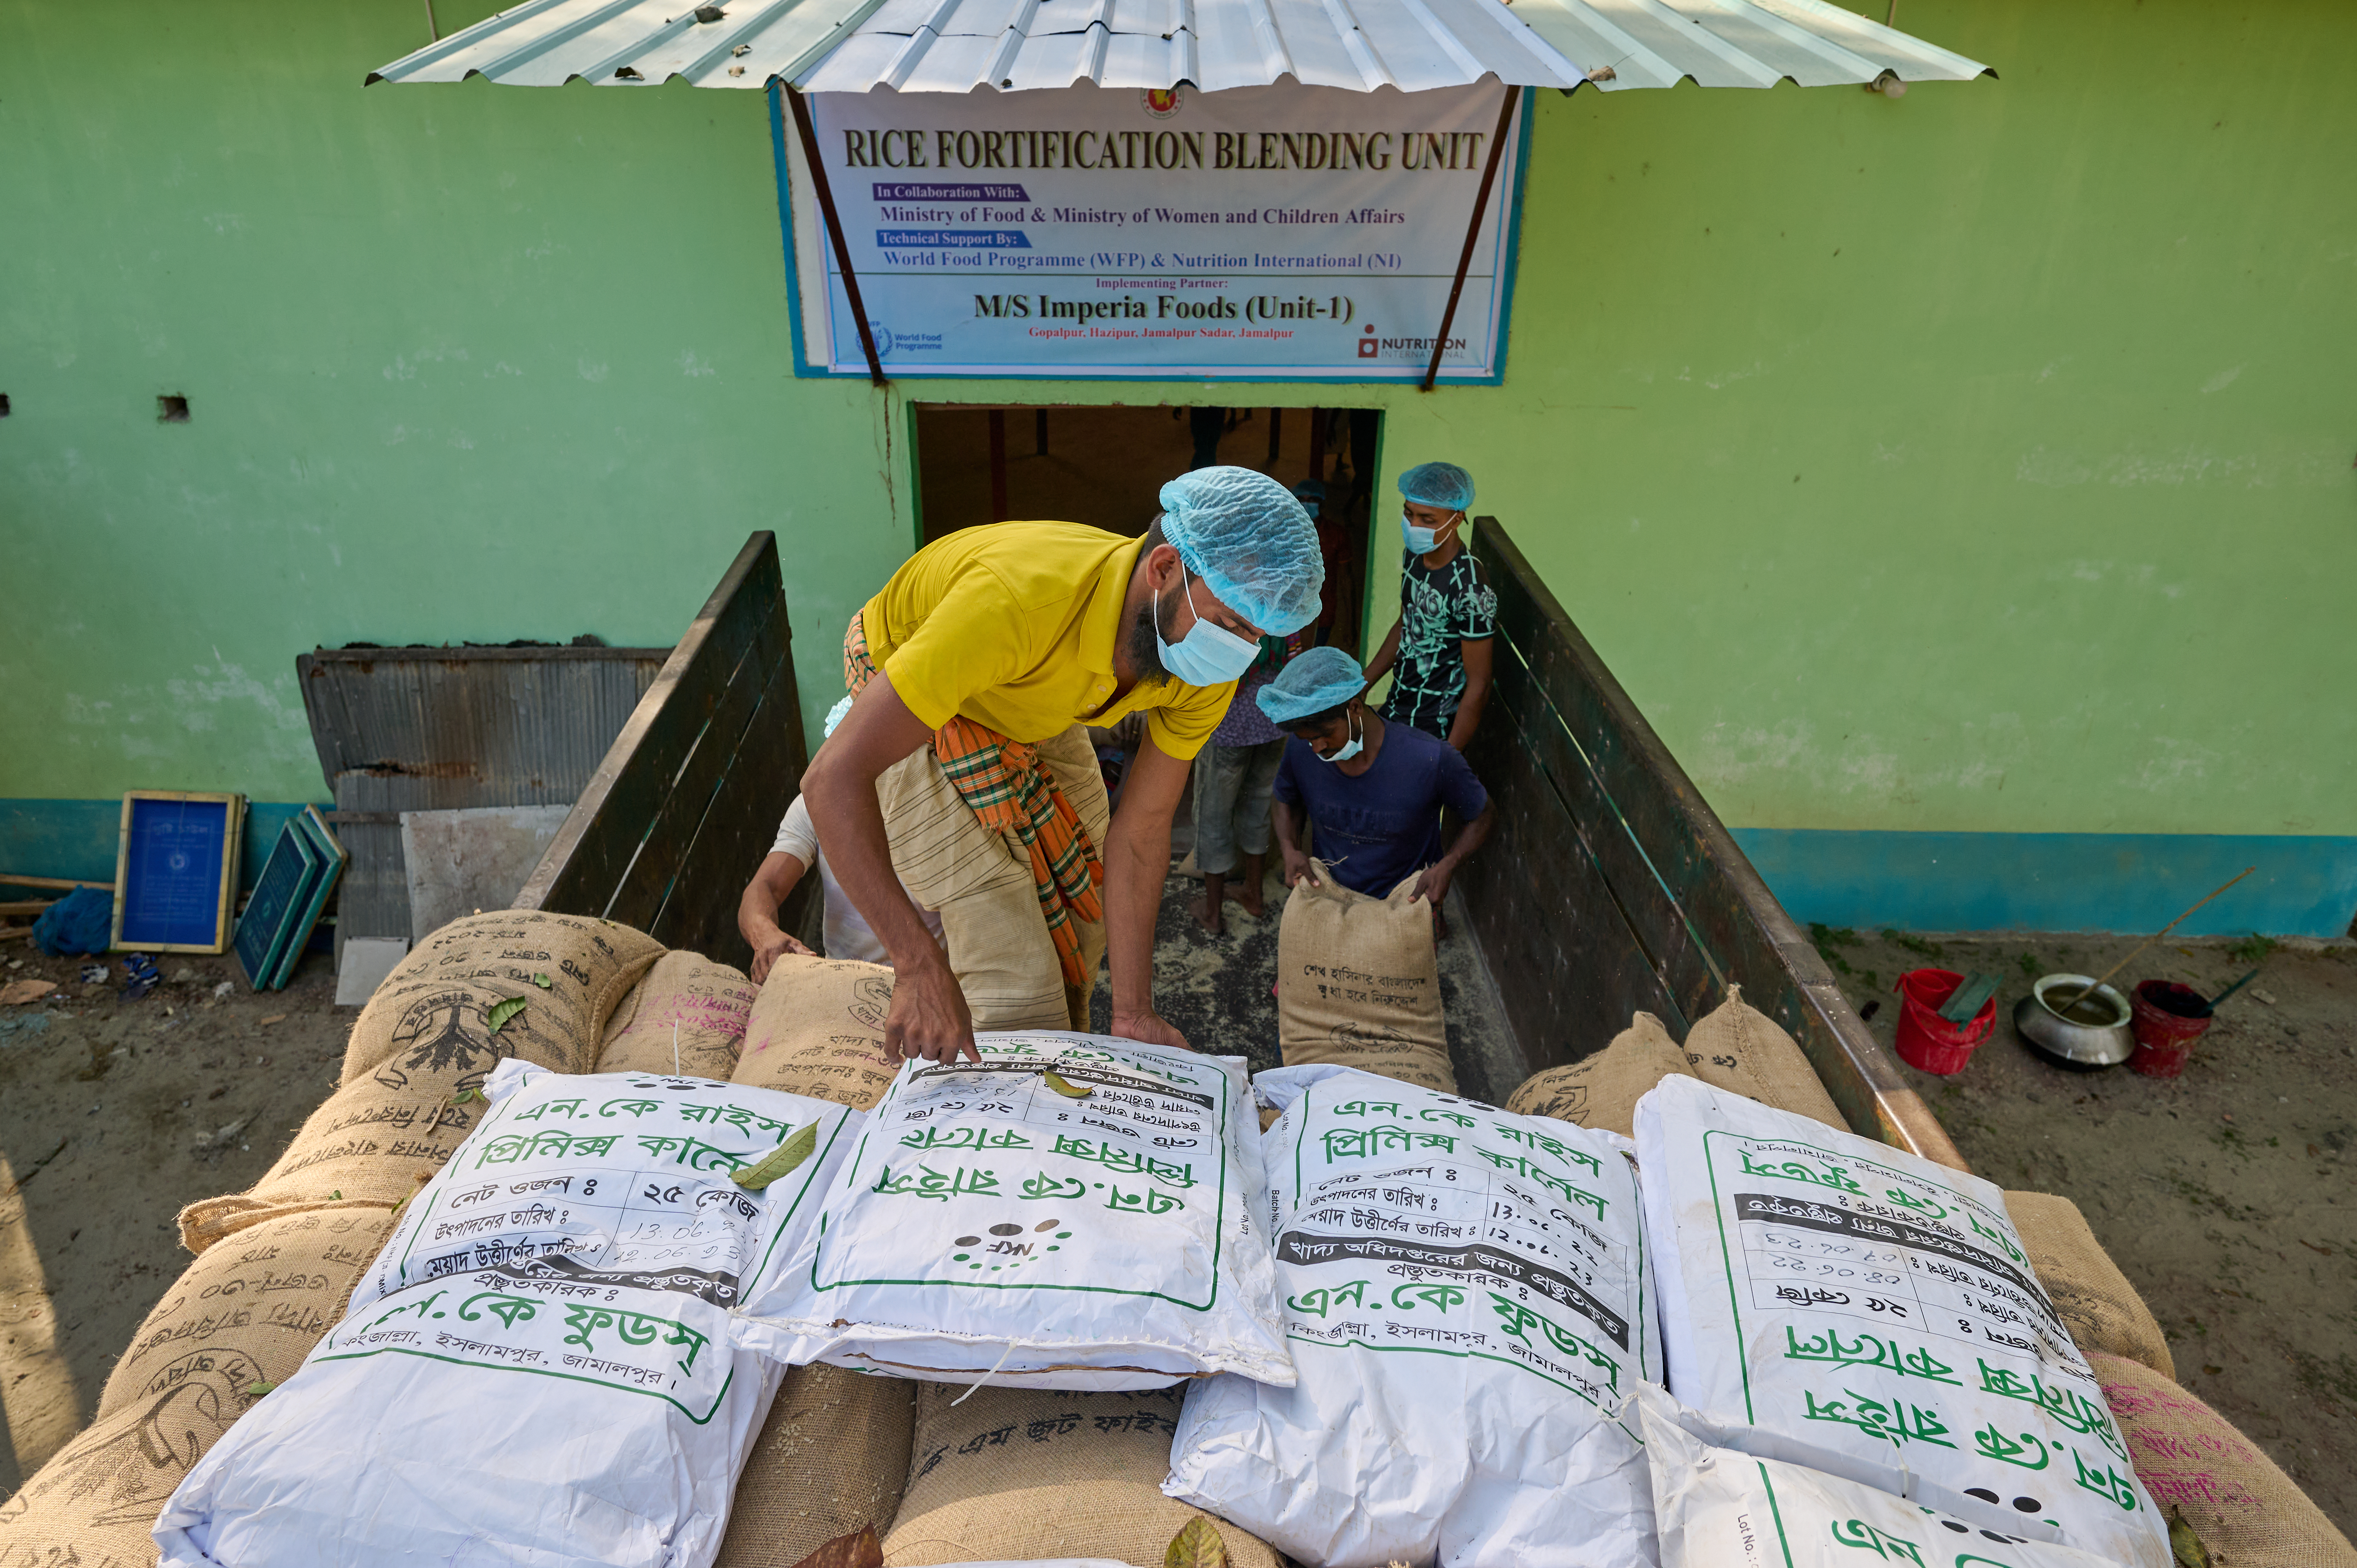 A rice fortification blending facility combines fortified rice kernels with non-fortified rice in the regulated ratio. Here, the rice is arriving on the back of a truck to be blended. Workers are unloaded the sacks of rice and carrying them into then blending facility. 